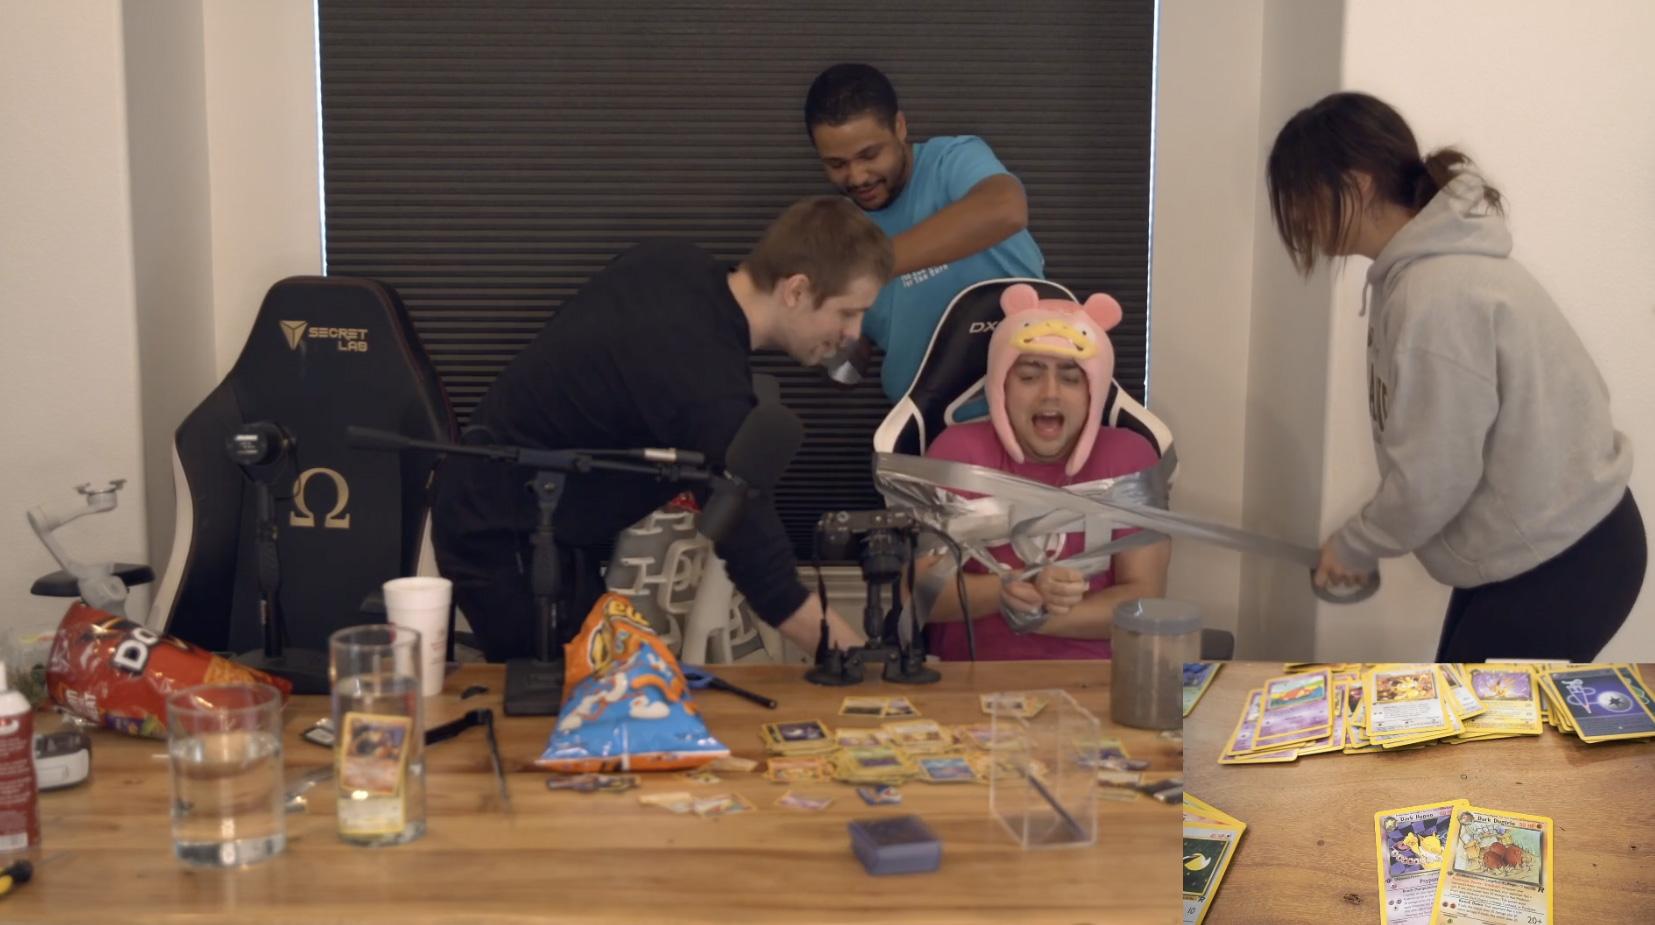 Screenshot of Mizkif being taped to chair during Sodapoppin Pokemon card Twitch stream.